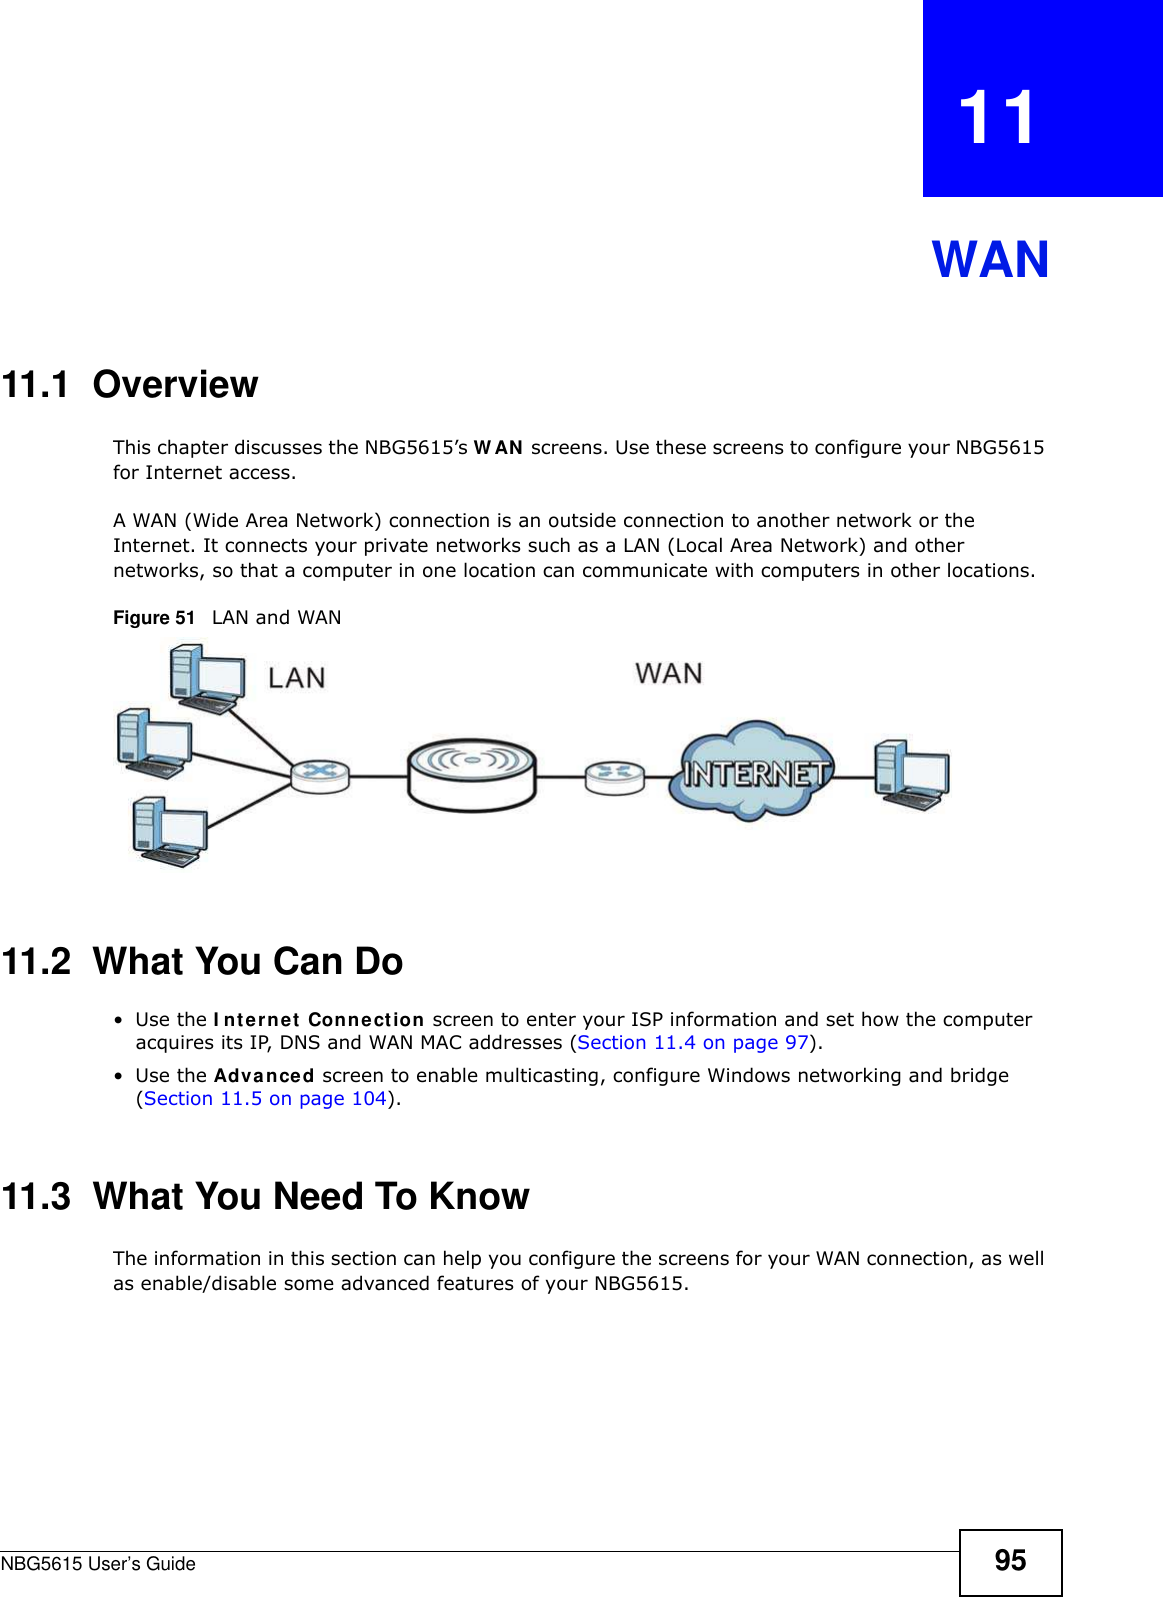 NBG5615 User’s Guide 95CHAPTER   11WAN11.1  OverviewThis chapter discusses the NBG5615’s W AN screens. Use these screens to configure your NBG5615 for Internet access.A WAN (Wide Area Network) connection is an outside connection to another network or the Internet. It connects your private networks such as a LAN (Local Area Network) and other networks, so that a computer in one location can communicate with computers in other locations.Figure 51   LAN and WAN11.2  What You Can Do•Use the I nternet Connection screen to enter your ISP information and set how the computer acquires its IP, DNS and WAN MAC addresses (Section 11.4 on page 97).•Use the Advanced screen to enable multicasting, configure Windows networking and bridge (Section 11.5 on page 104).11.3  What You Need To KnowThe information in this section can help you configure the screens for your WAN connection, as well as enable/disable some advanced features of your NBG5615.